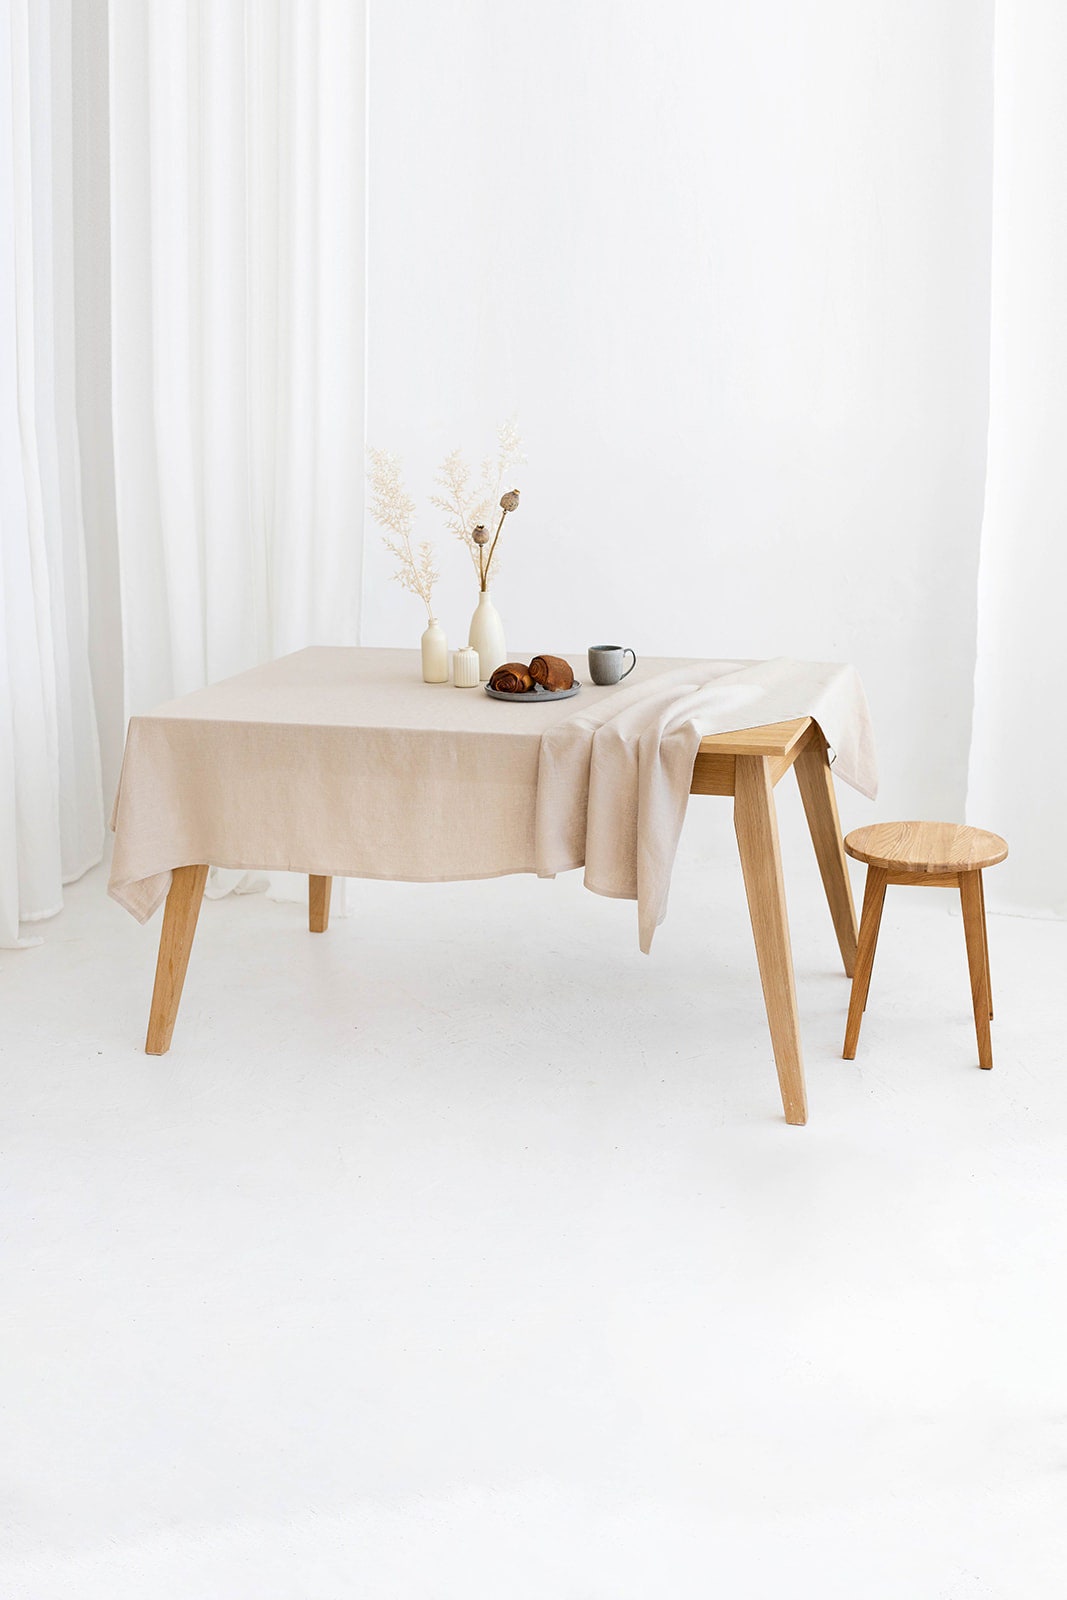 Table Covered With Linen Tablecloth In Natural Color 4 - Daily Linen